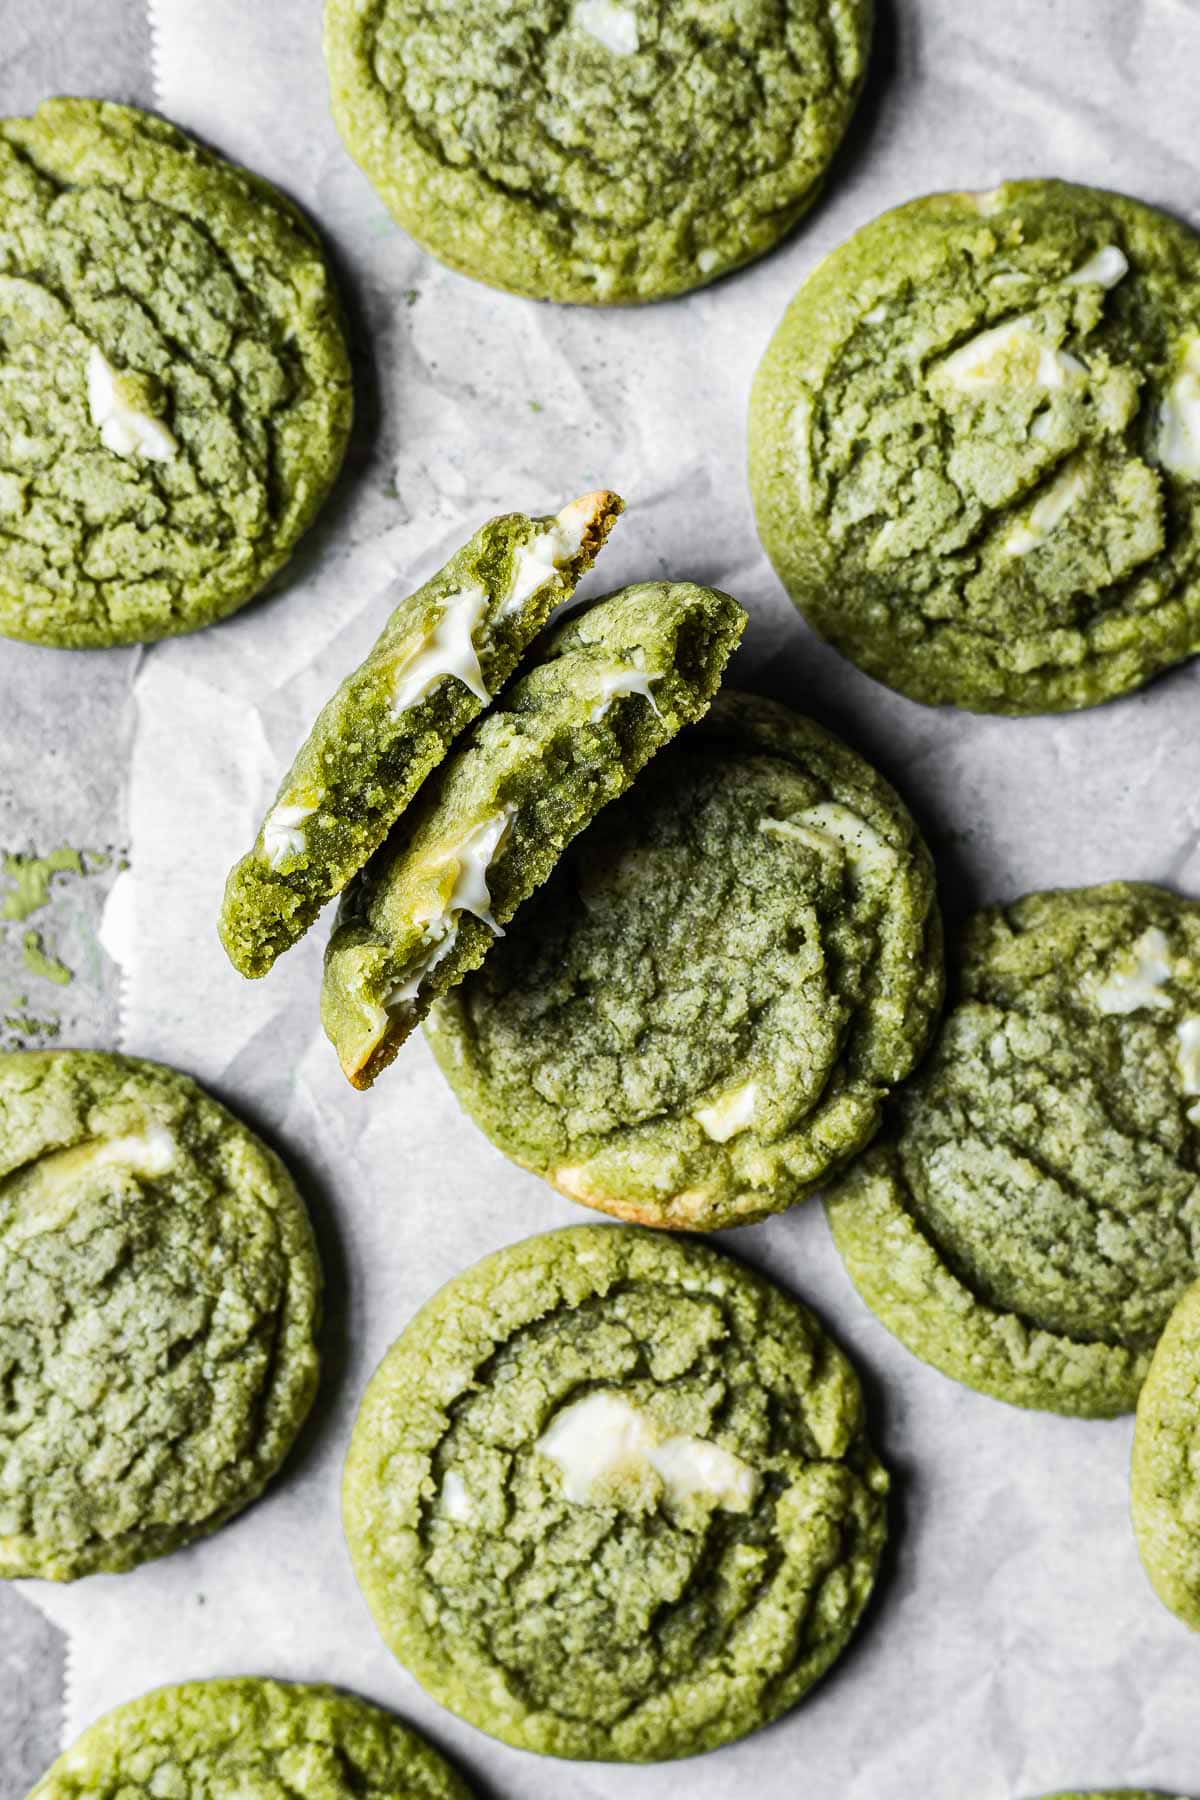 A matcha white chocolate cookie is broken in half, revealing the gooey melted chocolate inside. There are many other matcha cookies surrounding it.